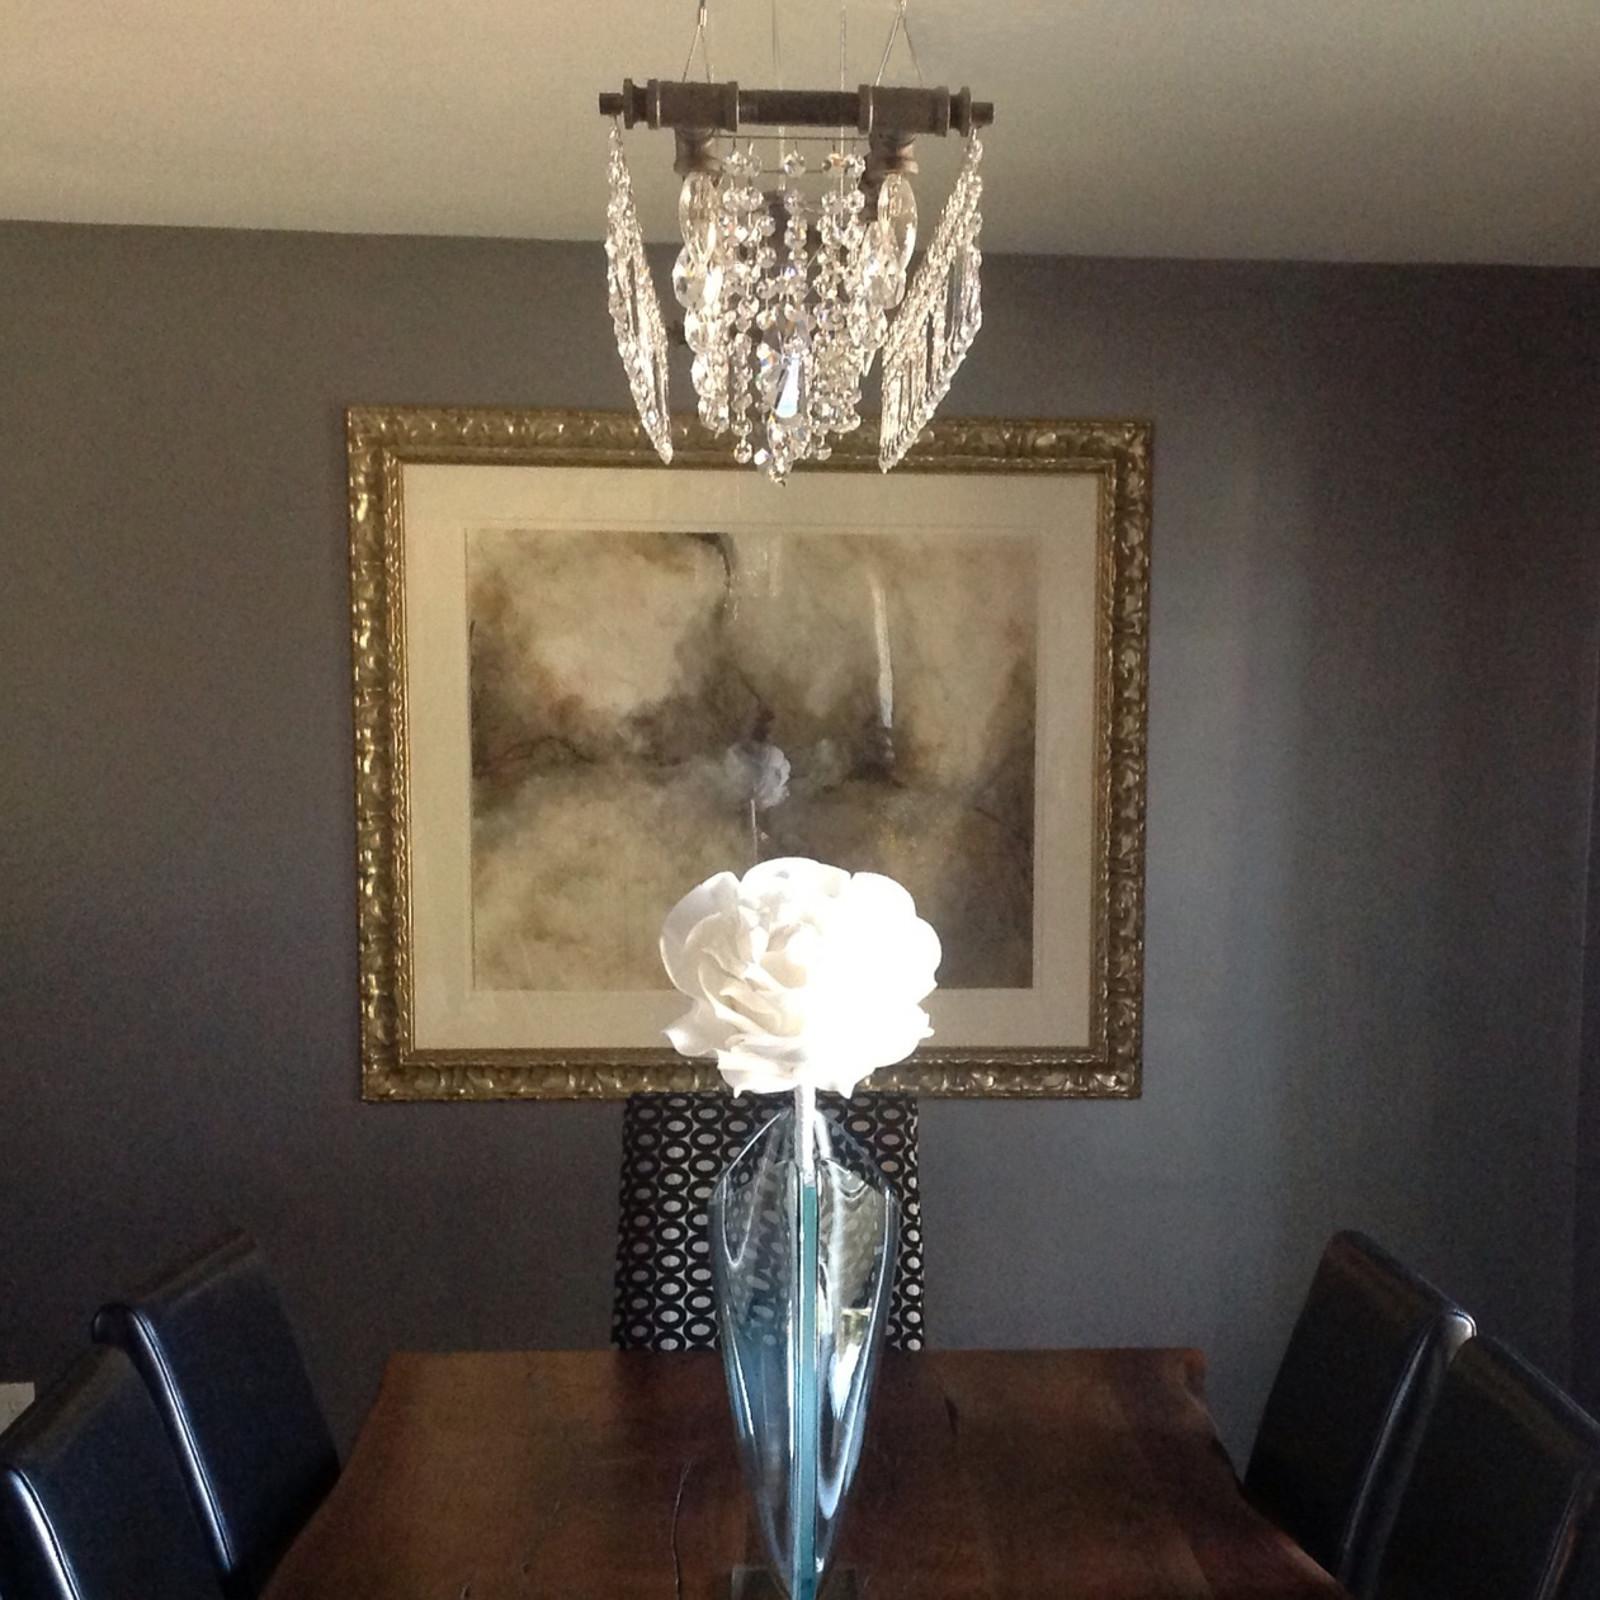 Steel Tribeca Banqueting Chandelier, 12 Bulb, by Michael McHale For Sale